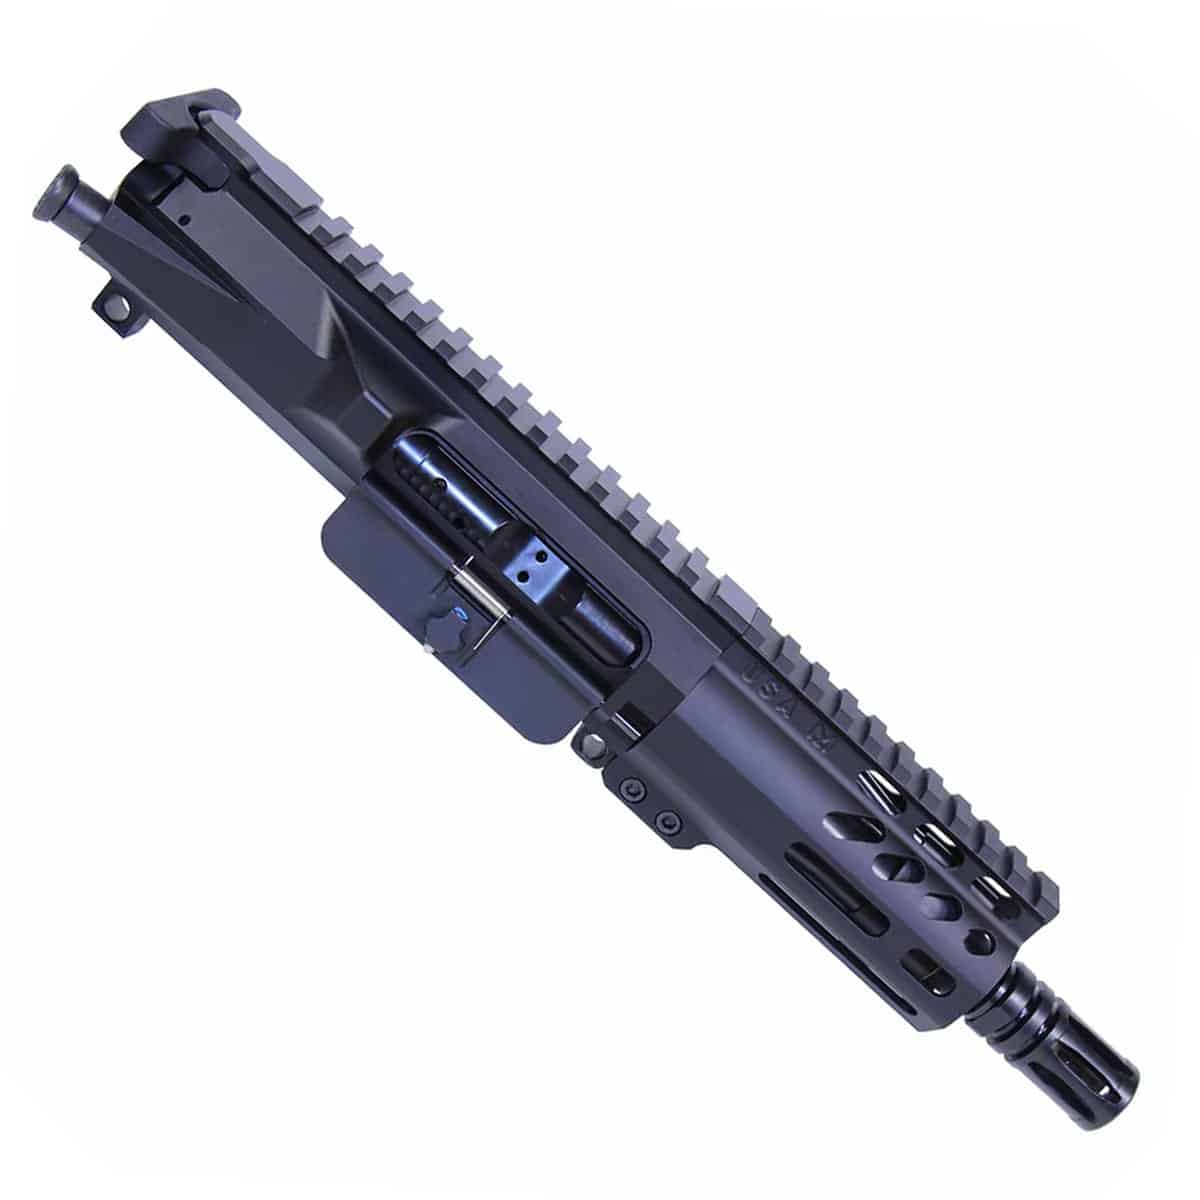 AR15 short-barreled upper with integrated handguard and muzzle device